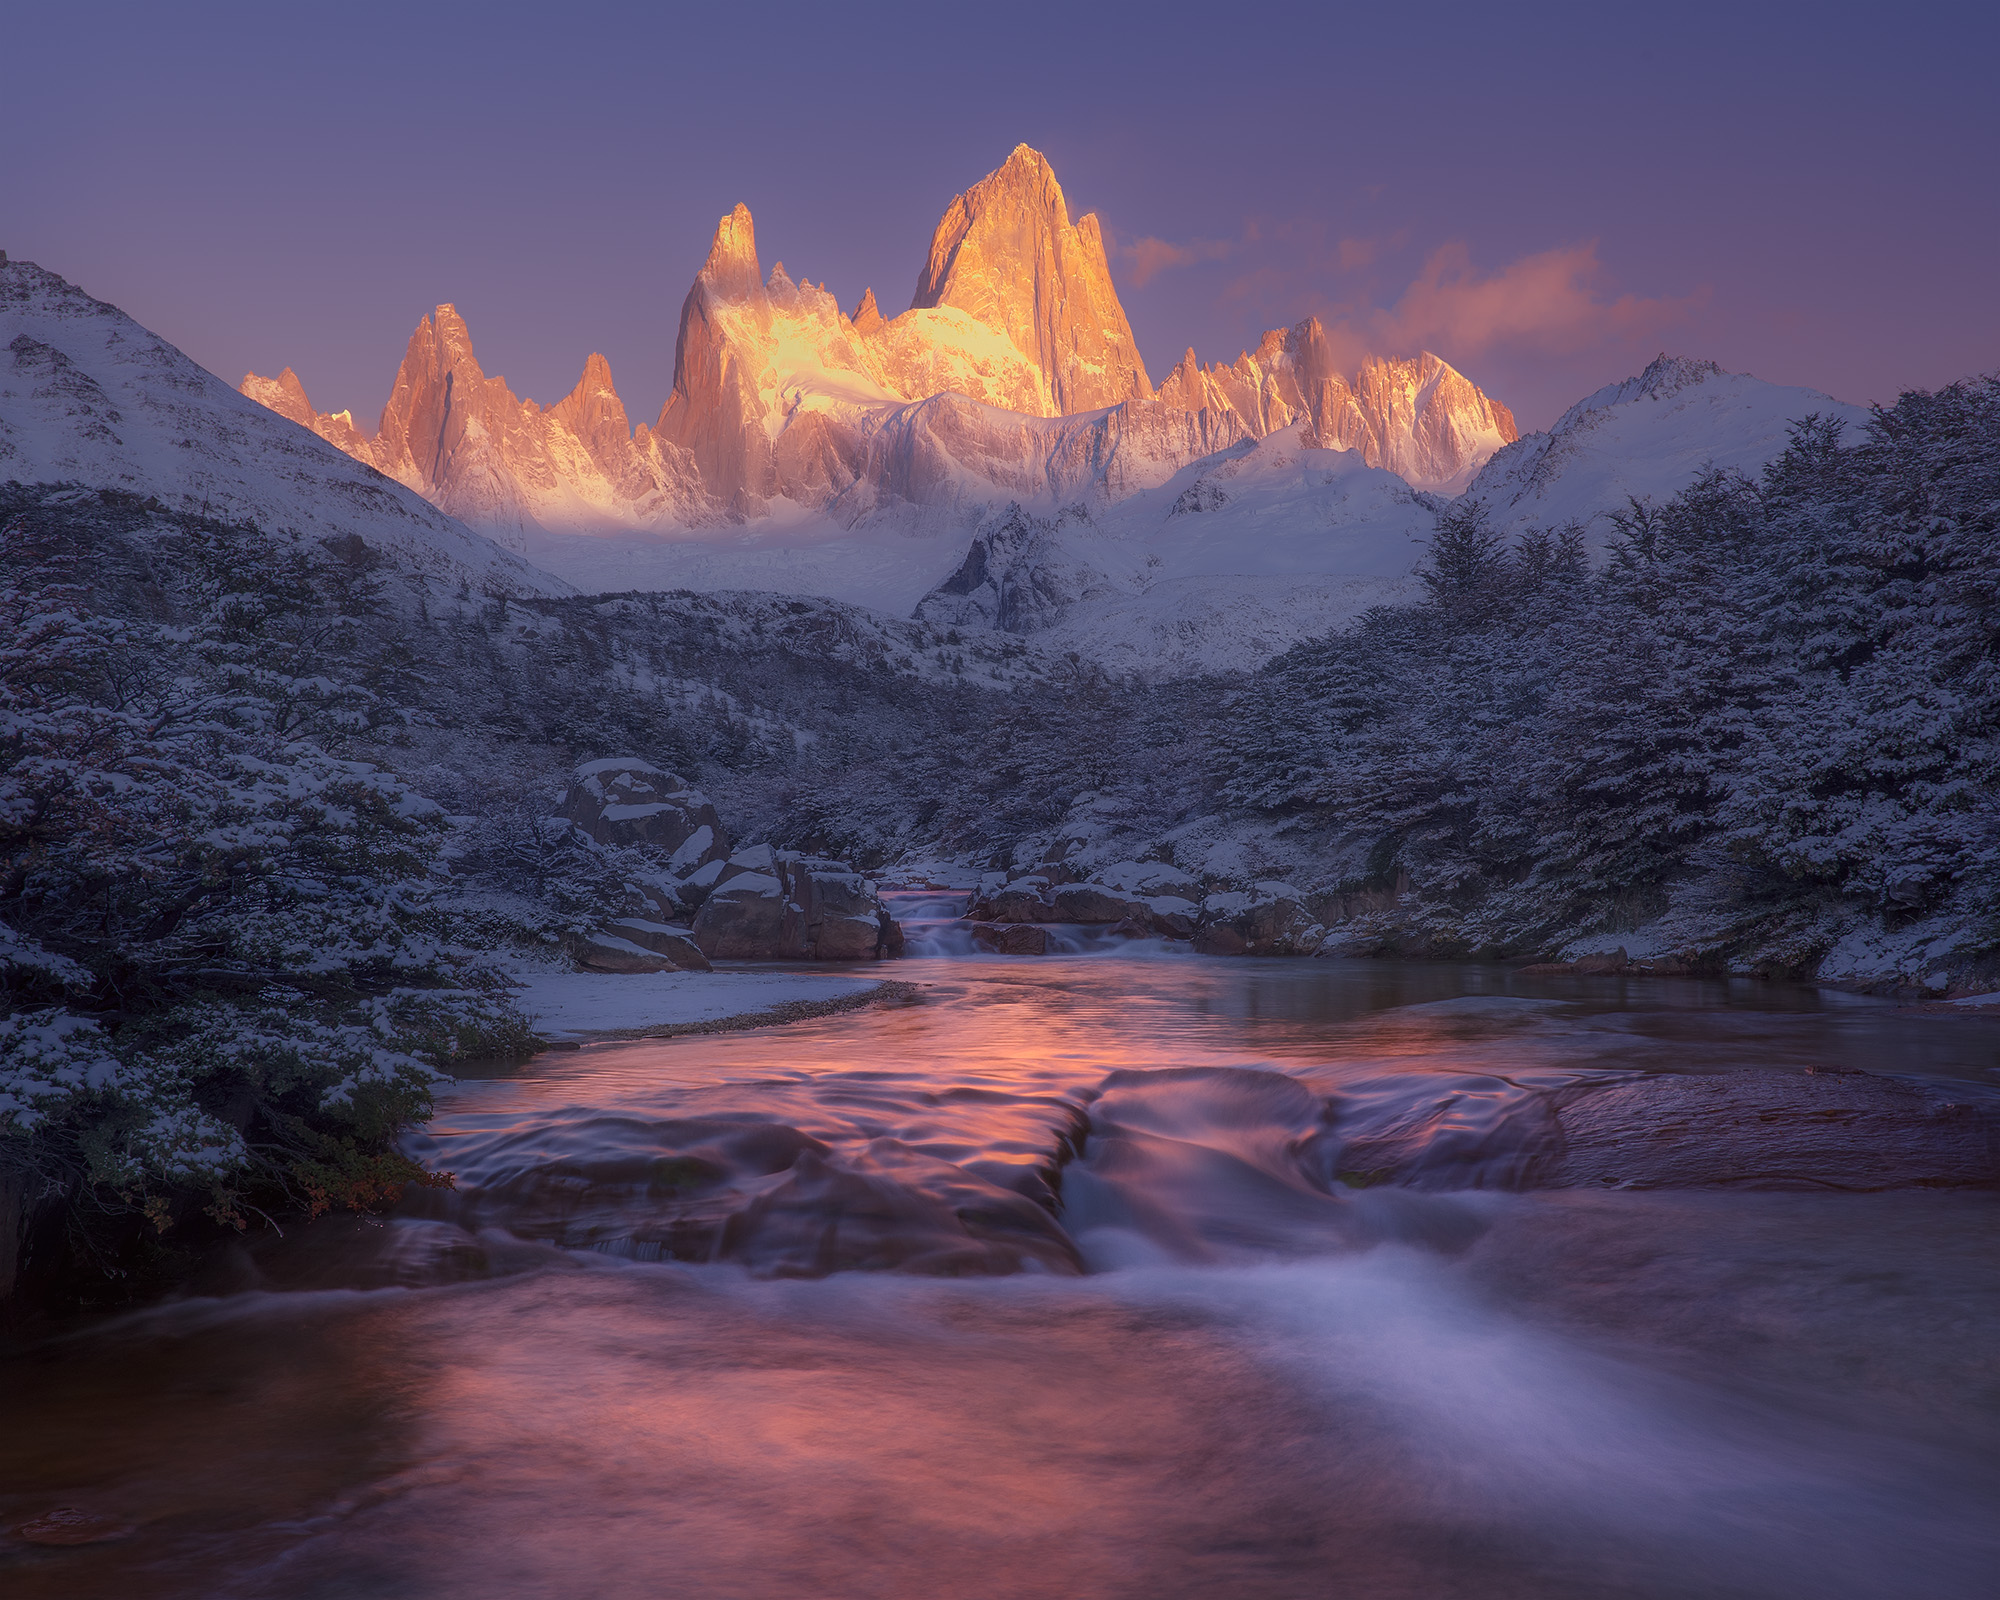 Misty Mountain Morning by Chris Moore - Exploring Light Photography